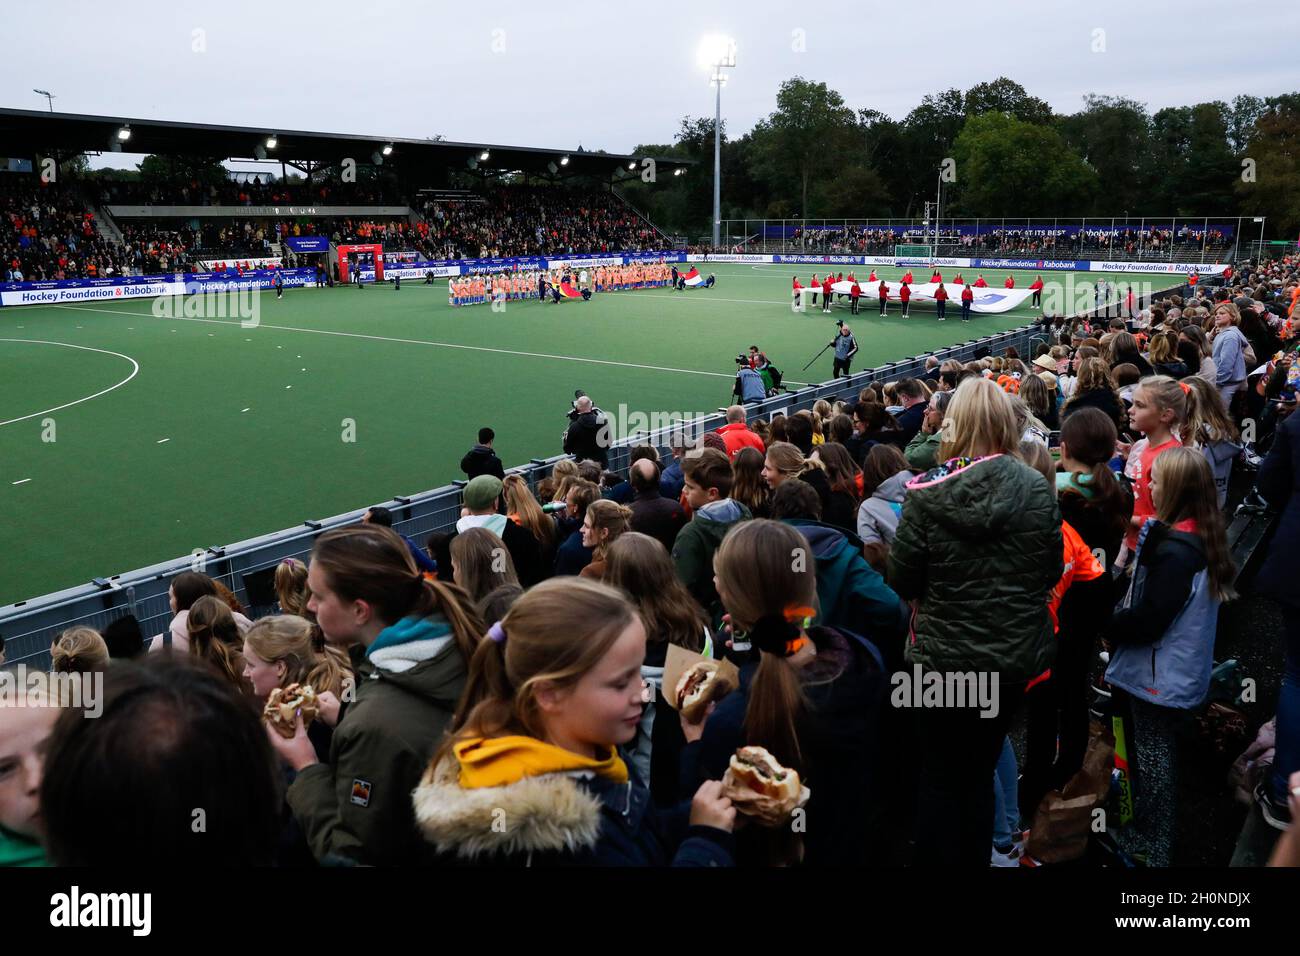 AMSTELVEEN, NETHERLANDS - OCTOBER 13: General overview of the Wagener Stadium with audience during the FIGH Pro League match between Netherlands and Belgium at Wagener Stadion on October 13, 2021 in Amstelveen, Netherlands (Photo by Peter Lous/Orange Pictures) Stock Photo